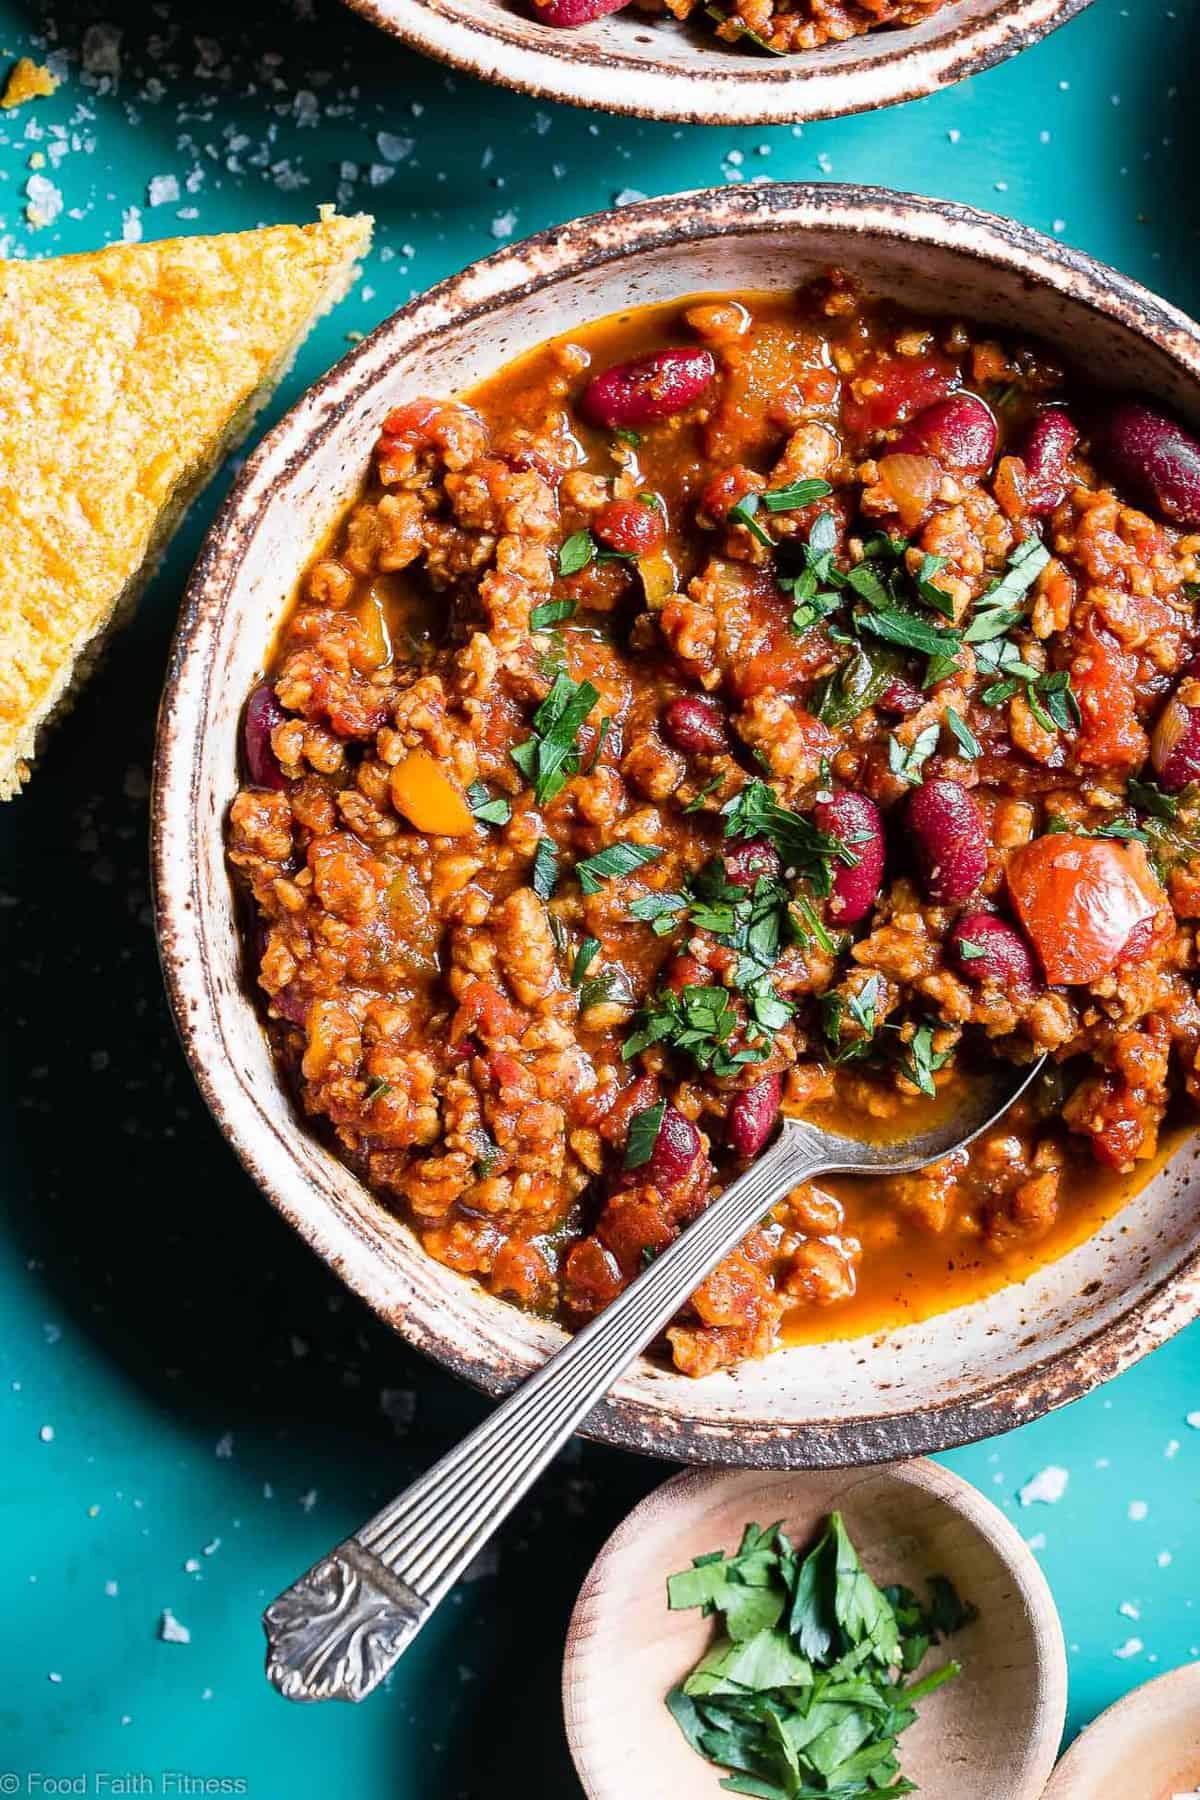 Instant Pot Meatless Vegan Chili -  You will NEVER believe that this is a vegetarian chili recipe! It's a healthy, gluten free weeknight meal that is ready in only 30 minutes! Even meat-eaters are going to LOVE it! Truly the best vegan chili recipe! | #Foodfaithfitness | #Vegan #Vegetarian #Chili #Instantpot #healthy